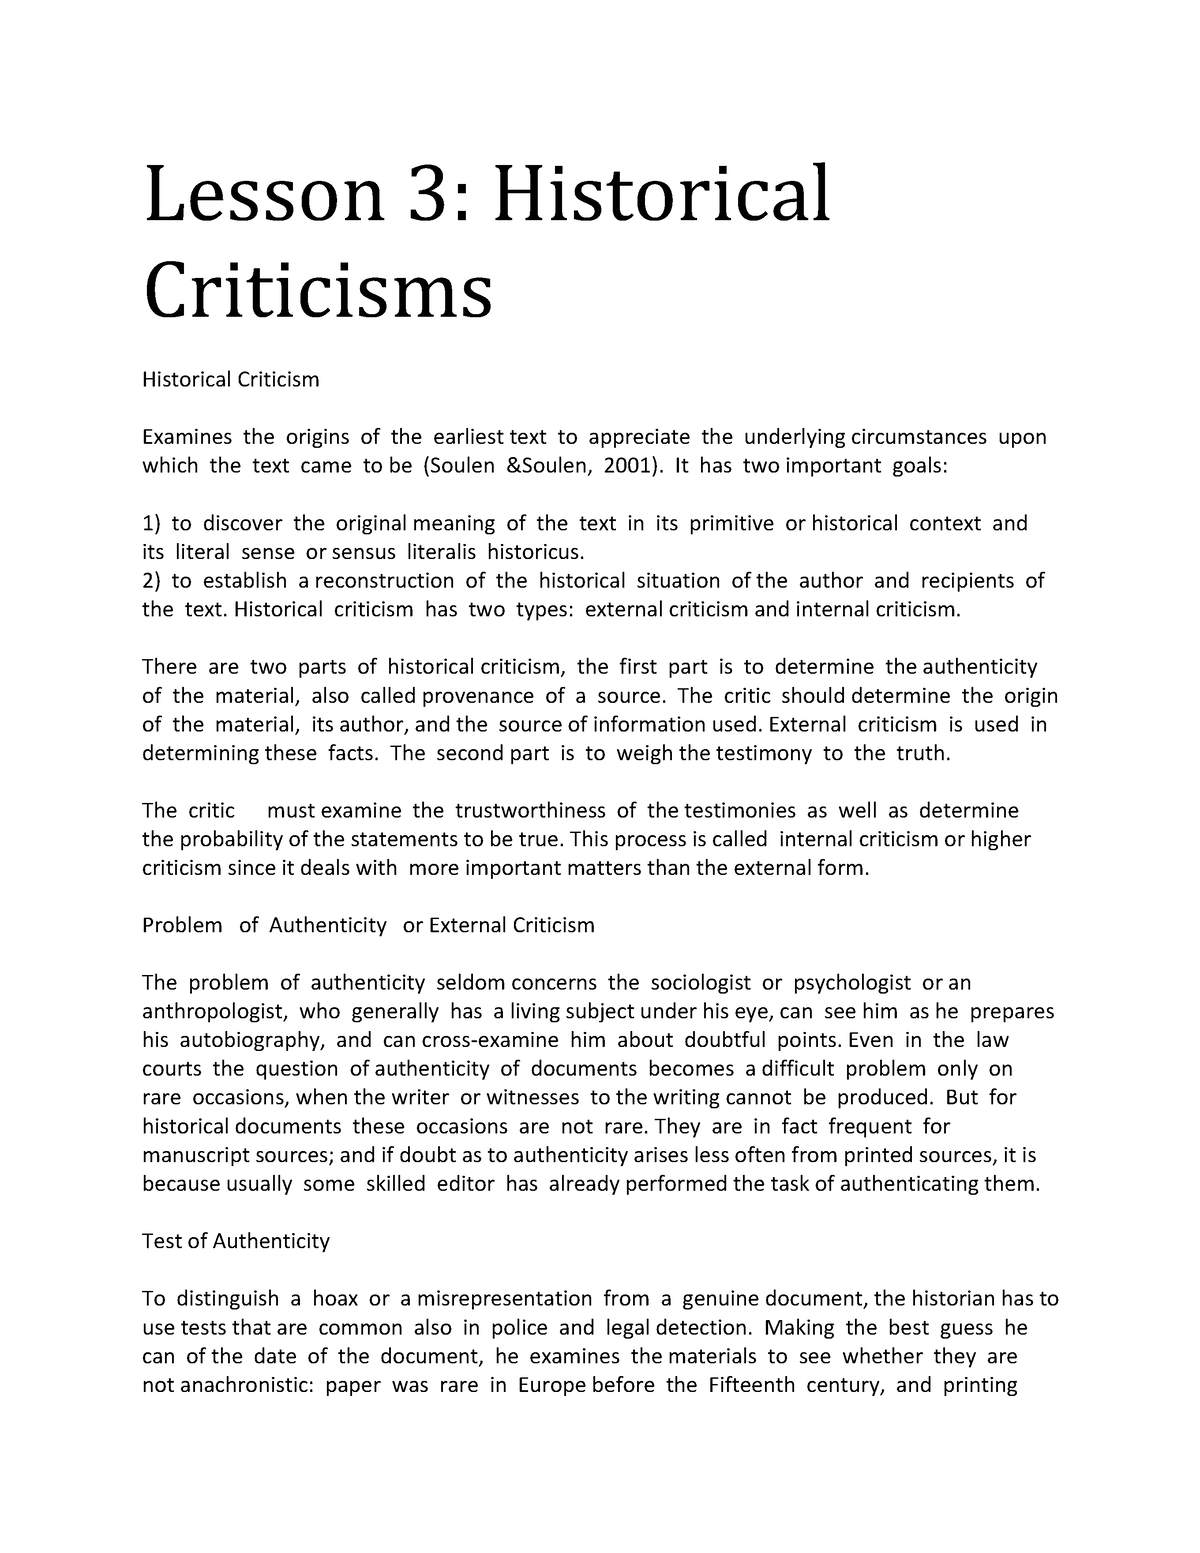 importance of historical criticism essay